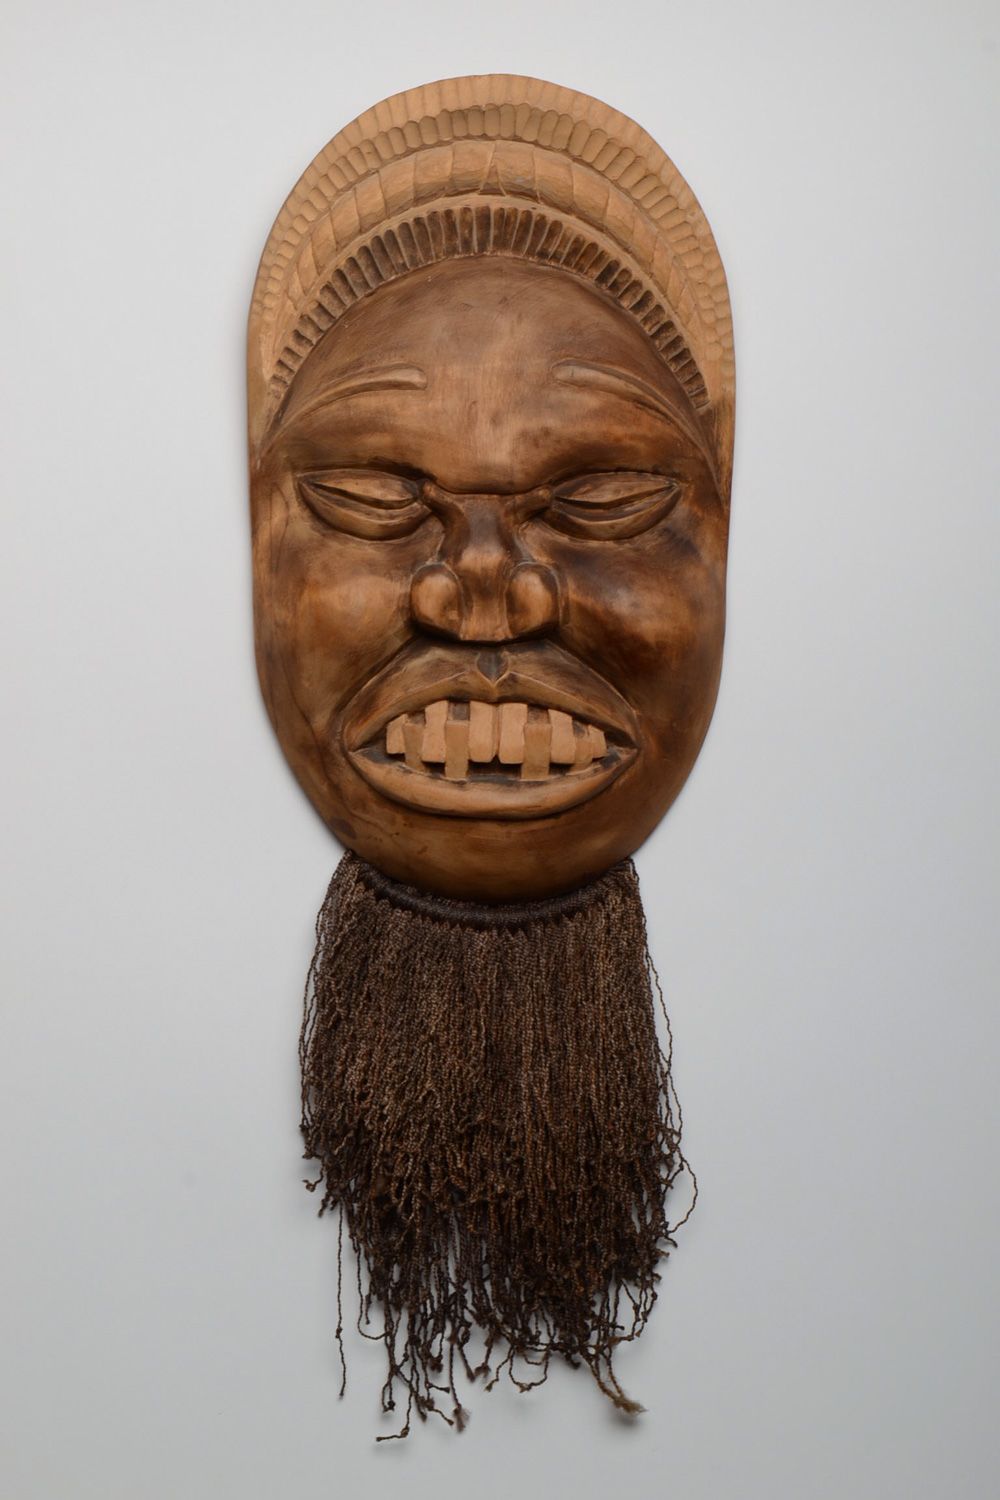 Handmade wall hanging ethnic mask carved of wood with beard for interior decor photo 1